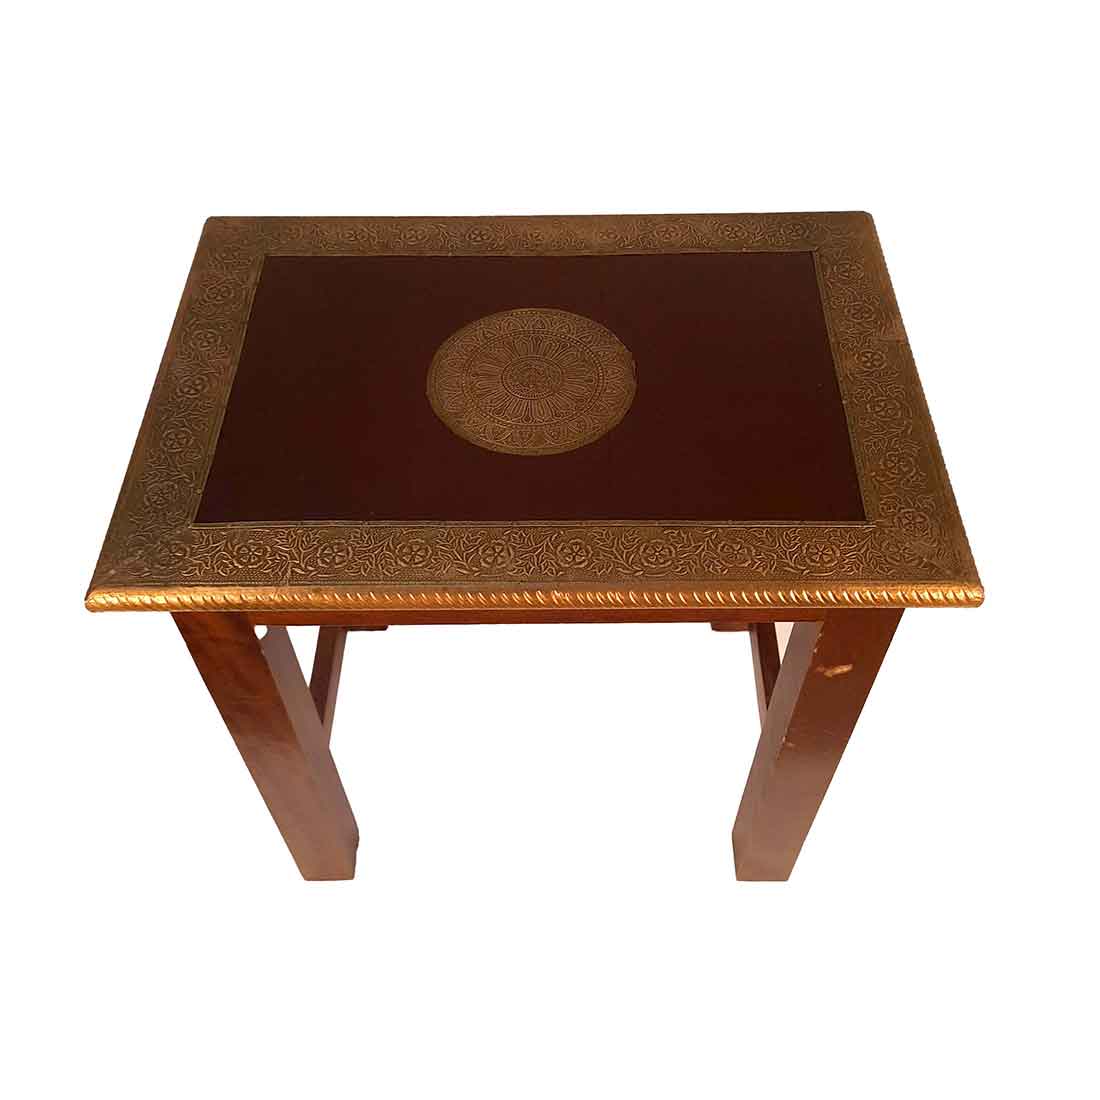 Brass Embellished | Wood Coffee Table | End Tables for Living Room -18 Inch - ApkaMart